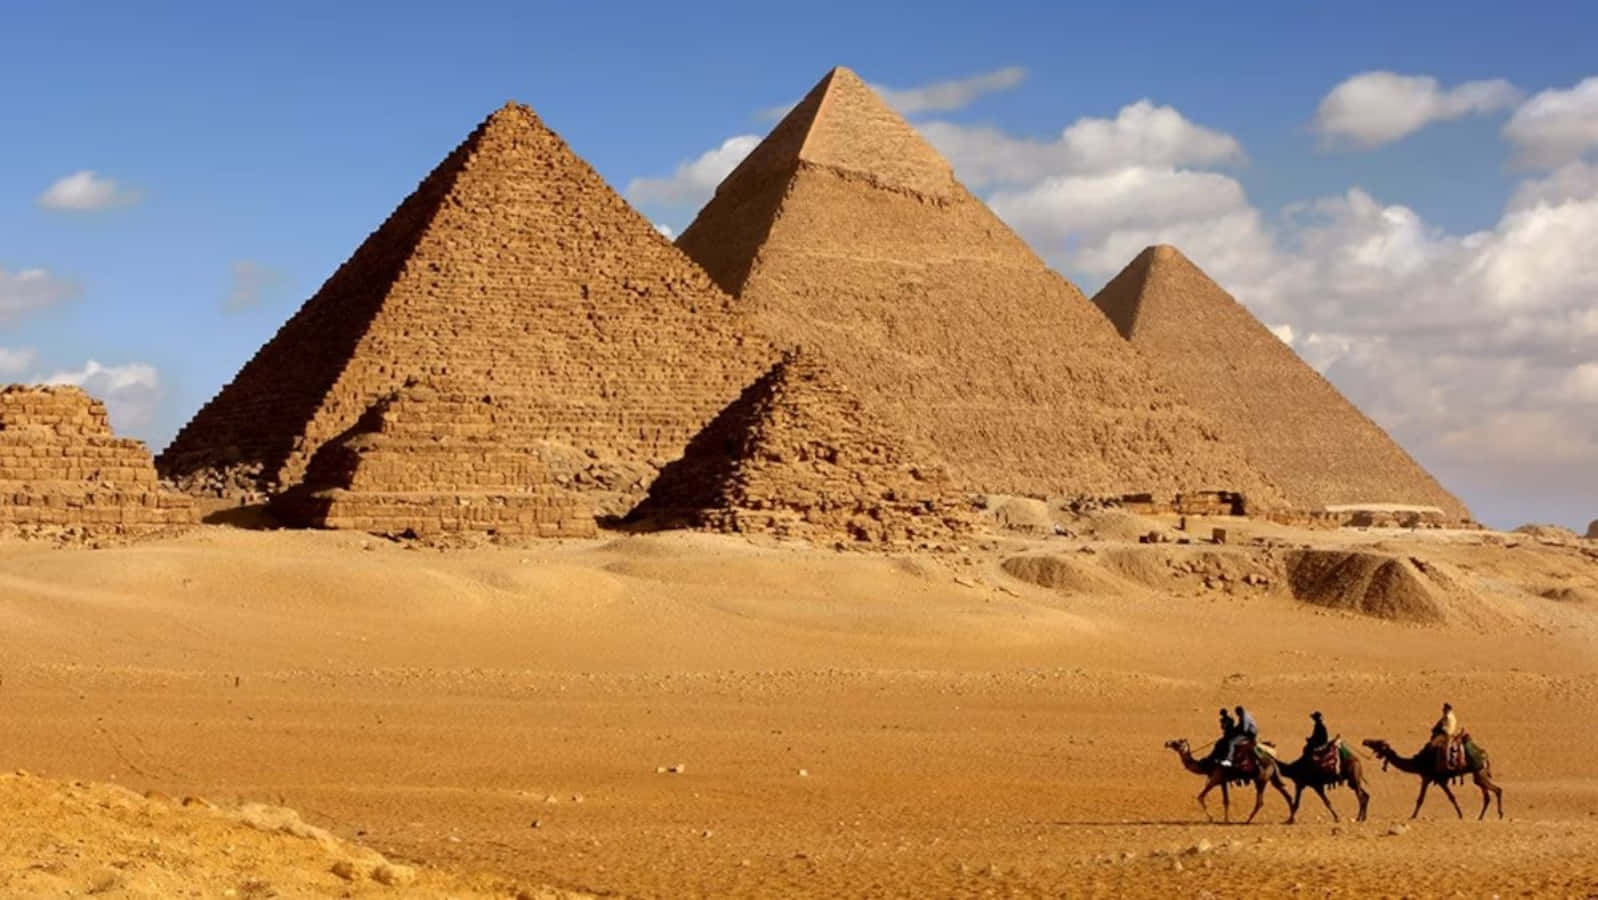 Three People Riding Camels In Front Of The Pyramids